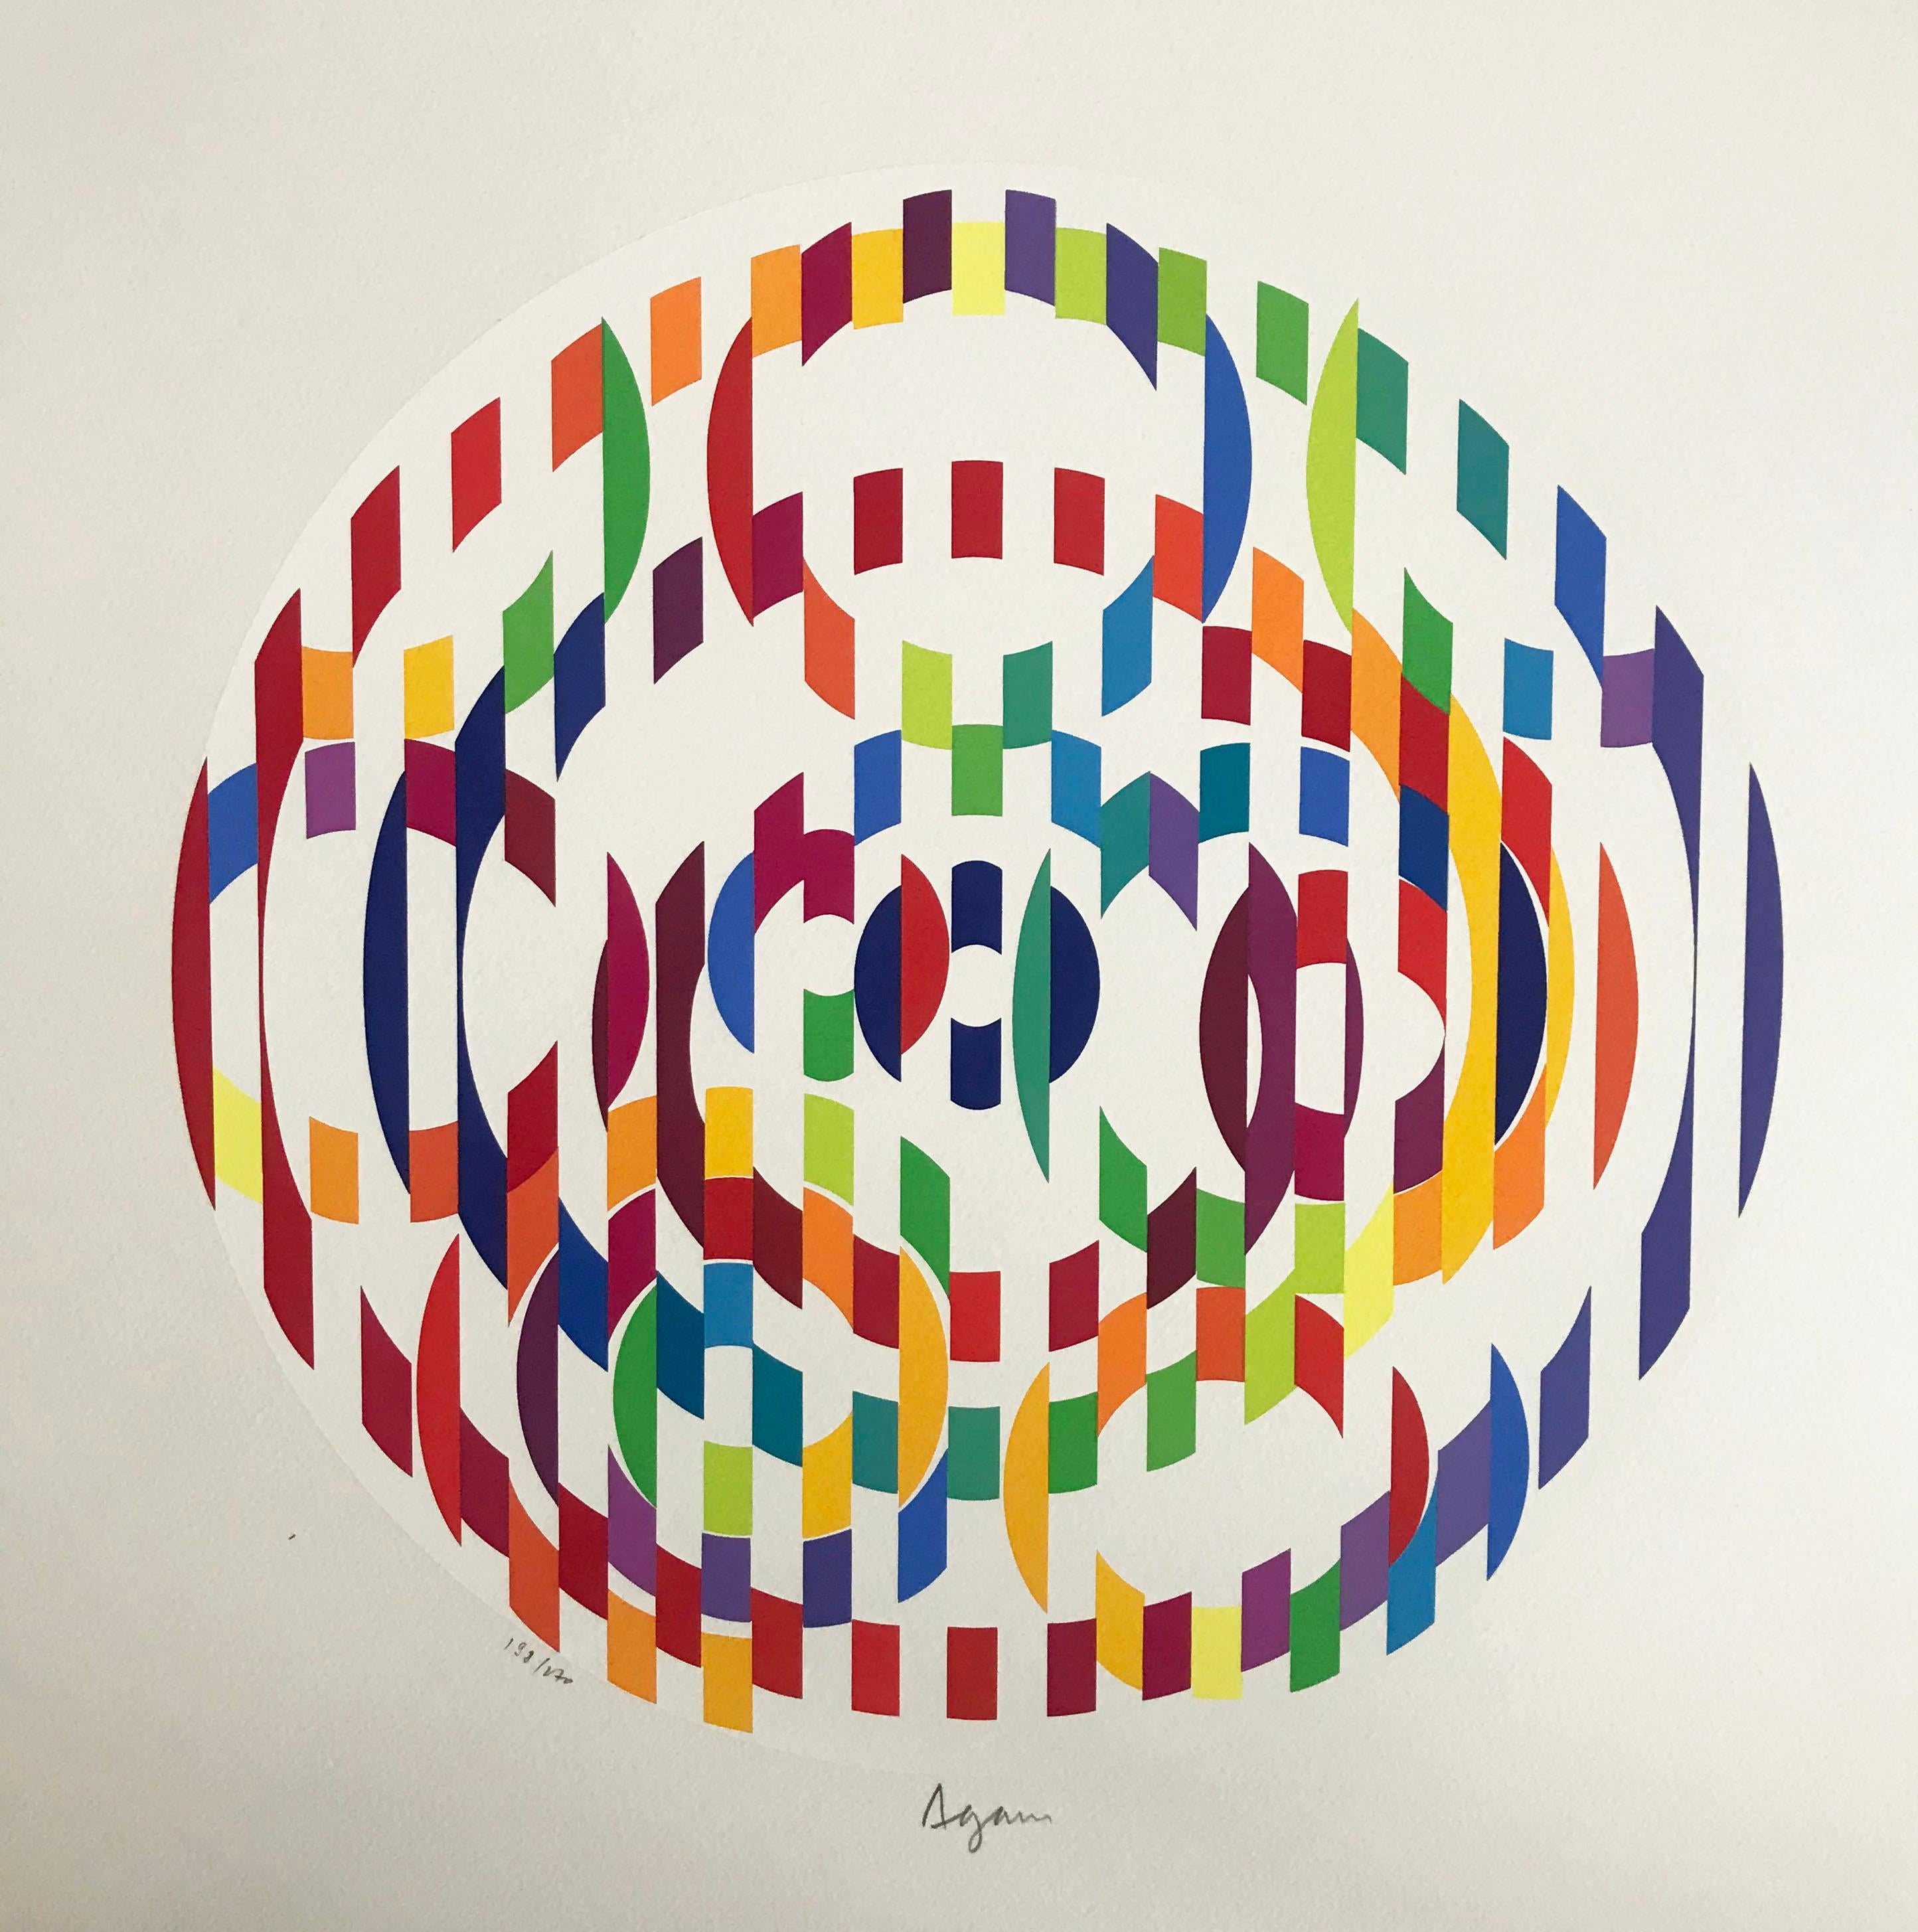 Yaacov Agam
Lithograph
"Magic circle"
Circa 1976
Signed by the artist in pencil 
Numbered in pencil 198/270
Perfect condition
38 x 38 cms
890 euros